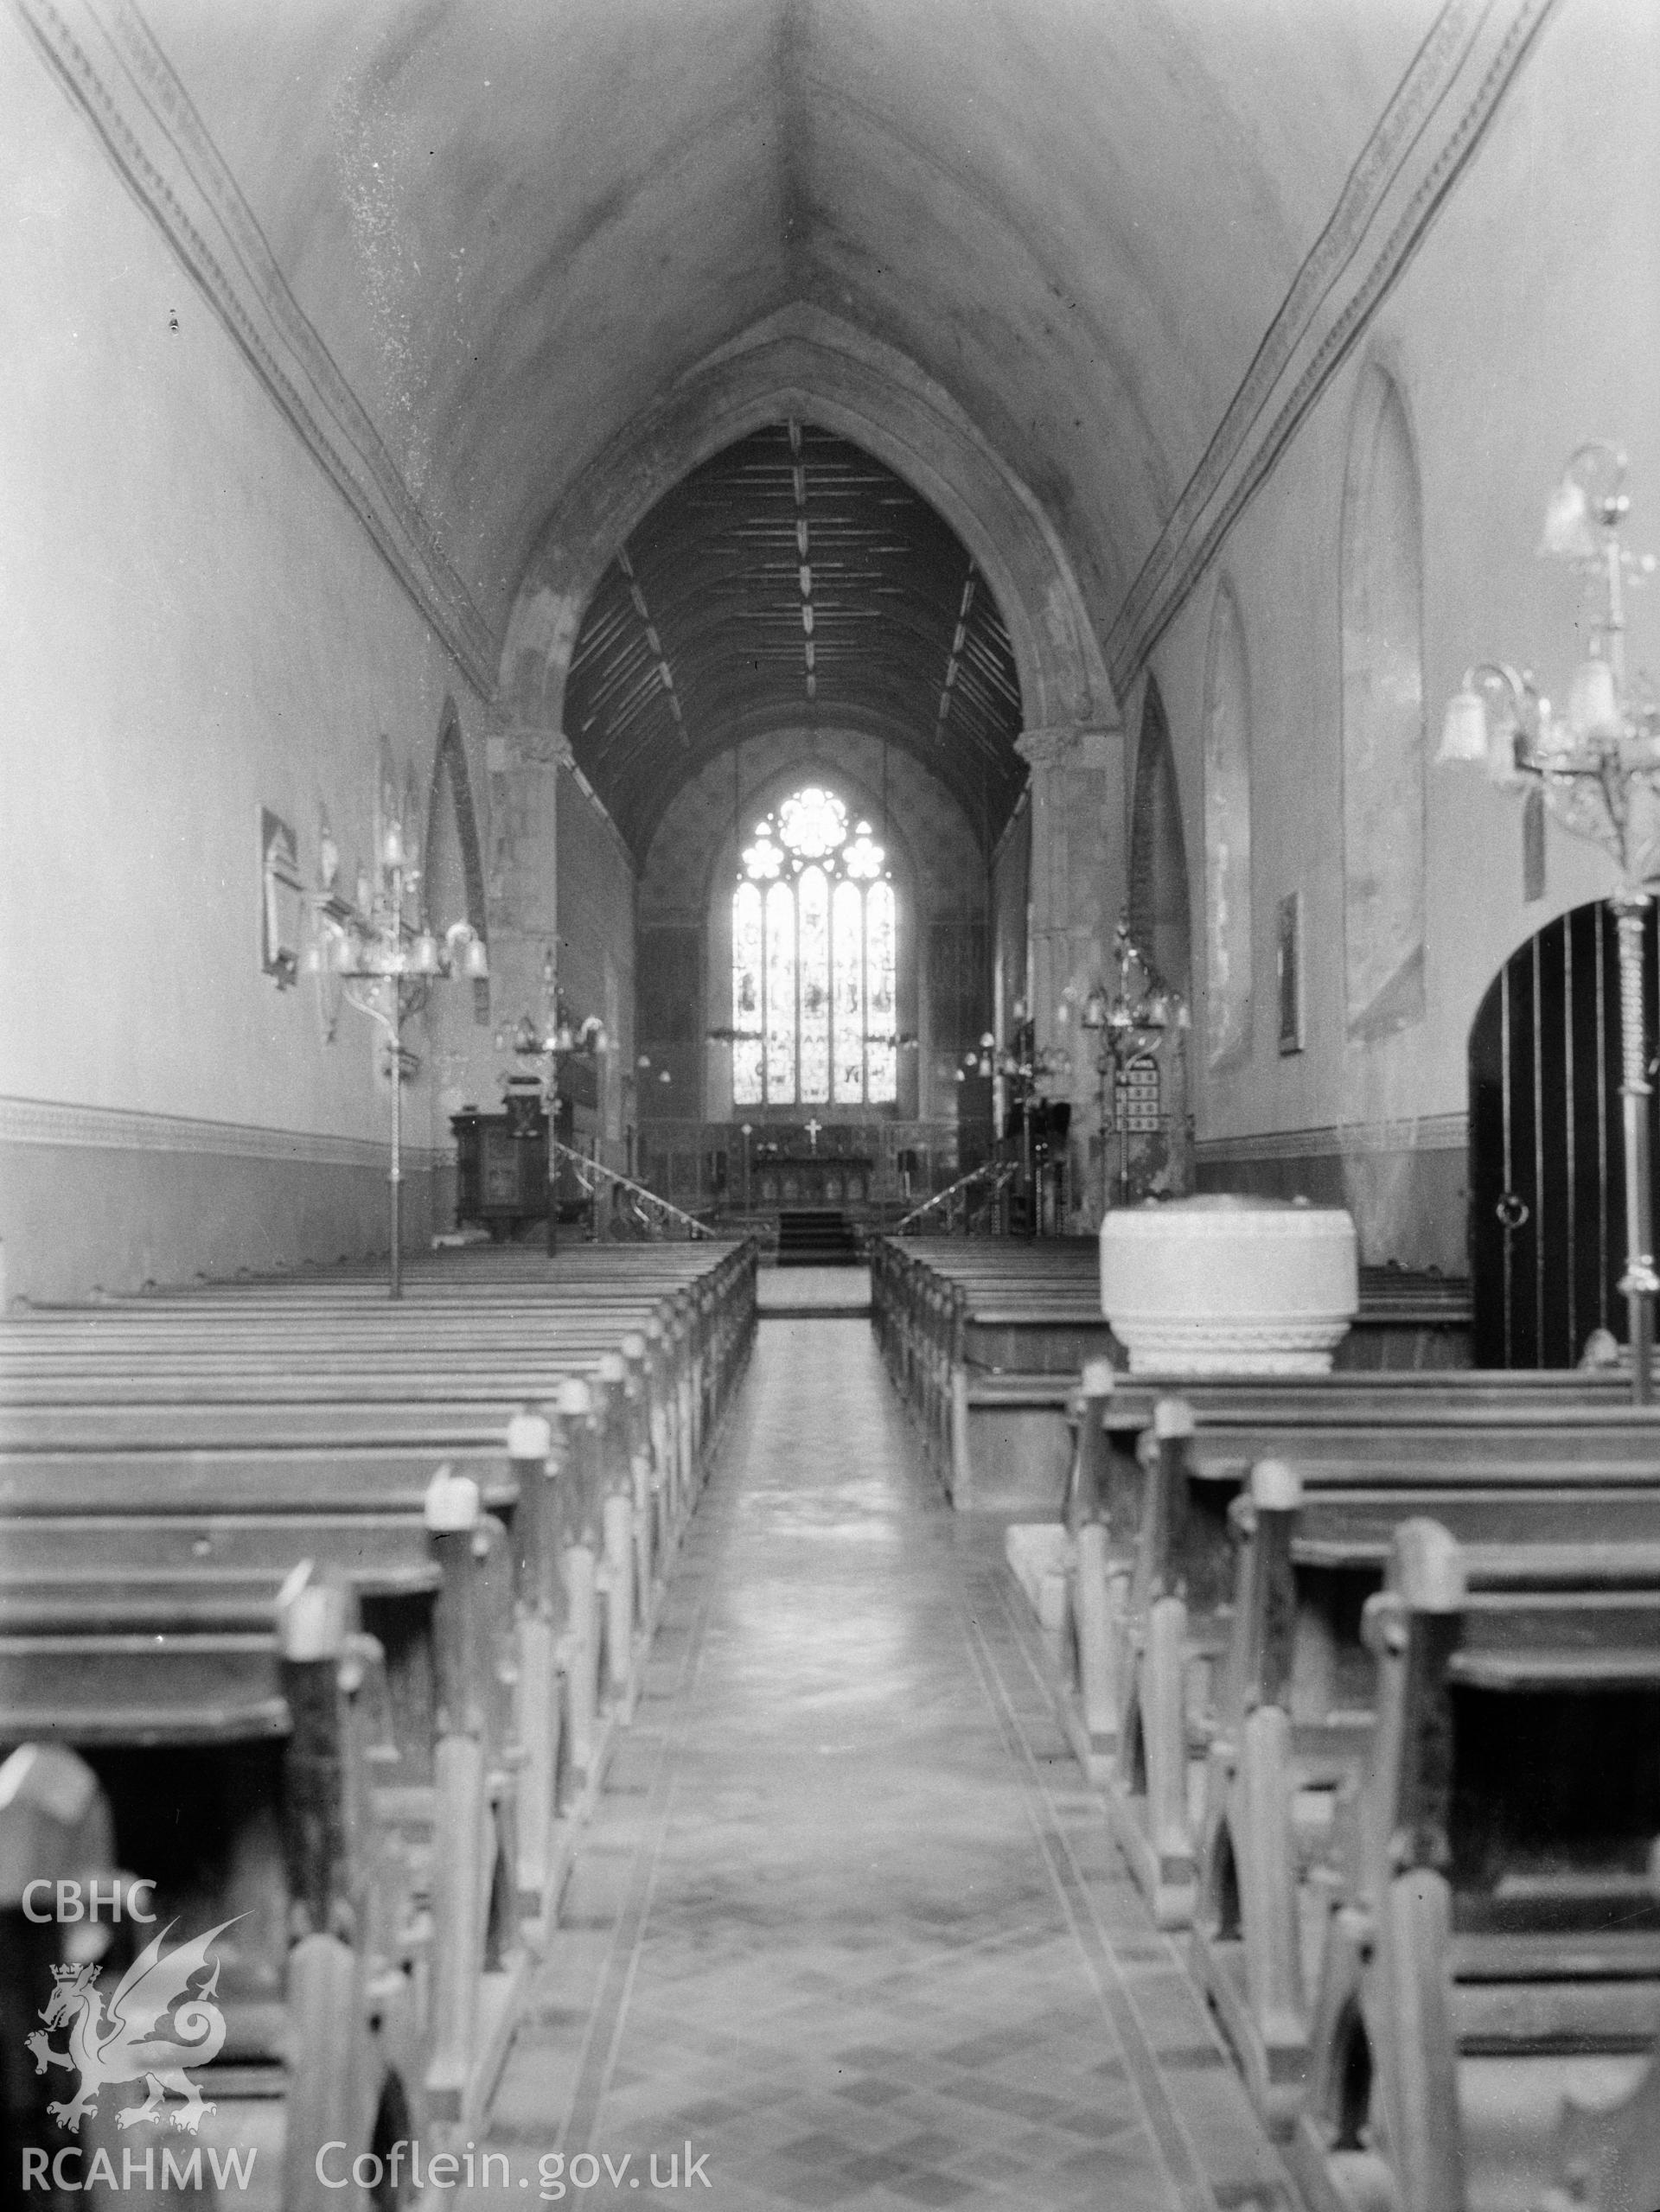 Digital copy of a nitrate negative showing interior from west, view of nave, St Nicholas' Priory Church, Monkton. From the National Building Record Postcard Collection.